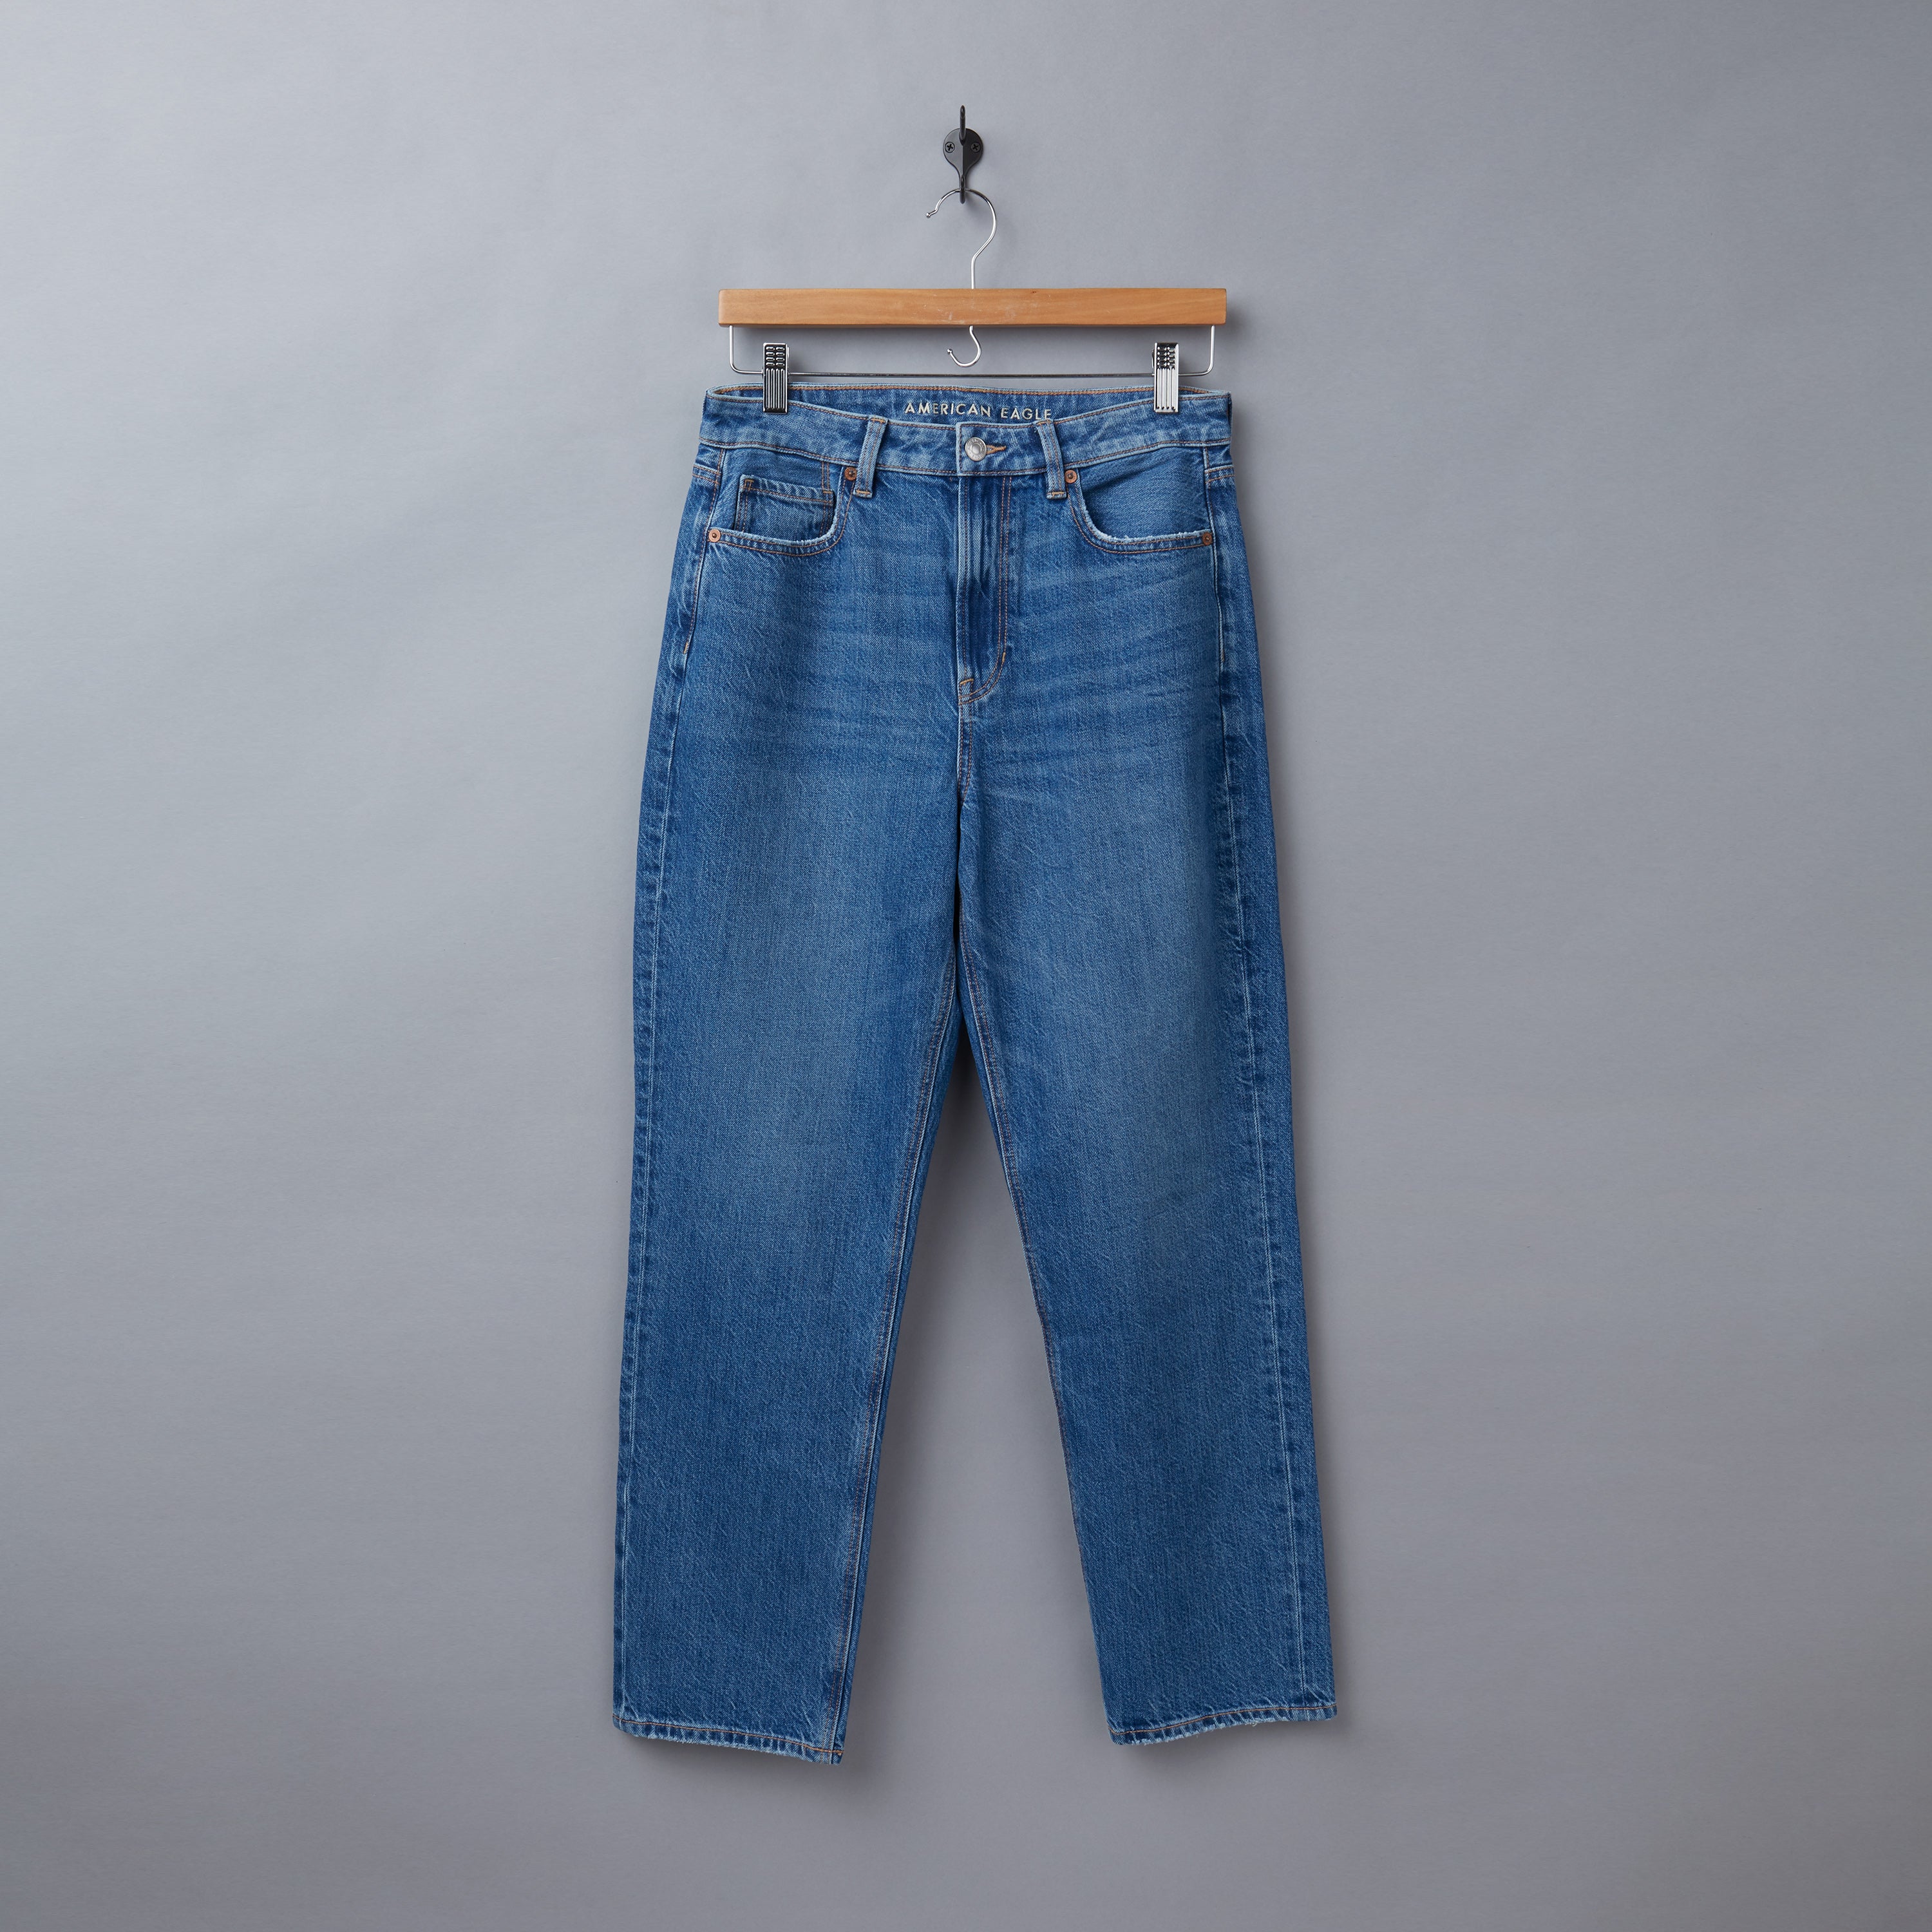 American Eagle Jeans – WE-AR4